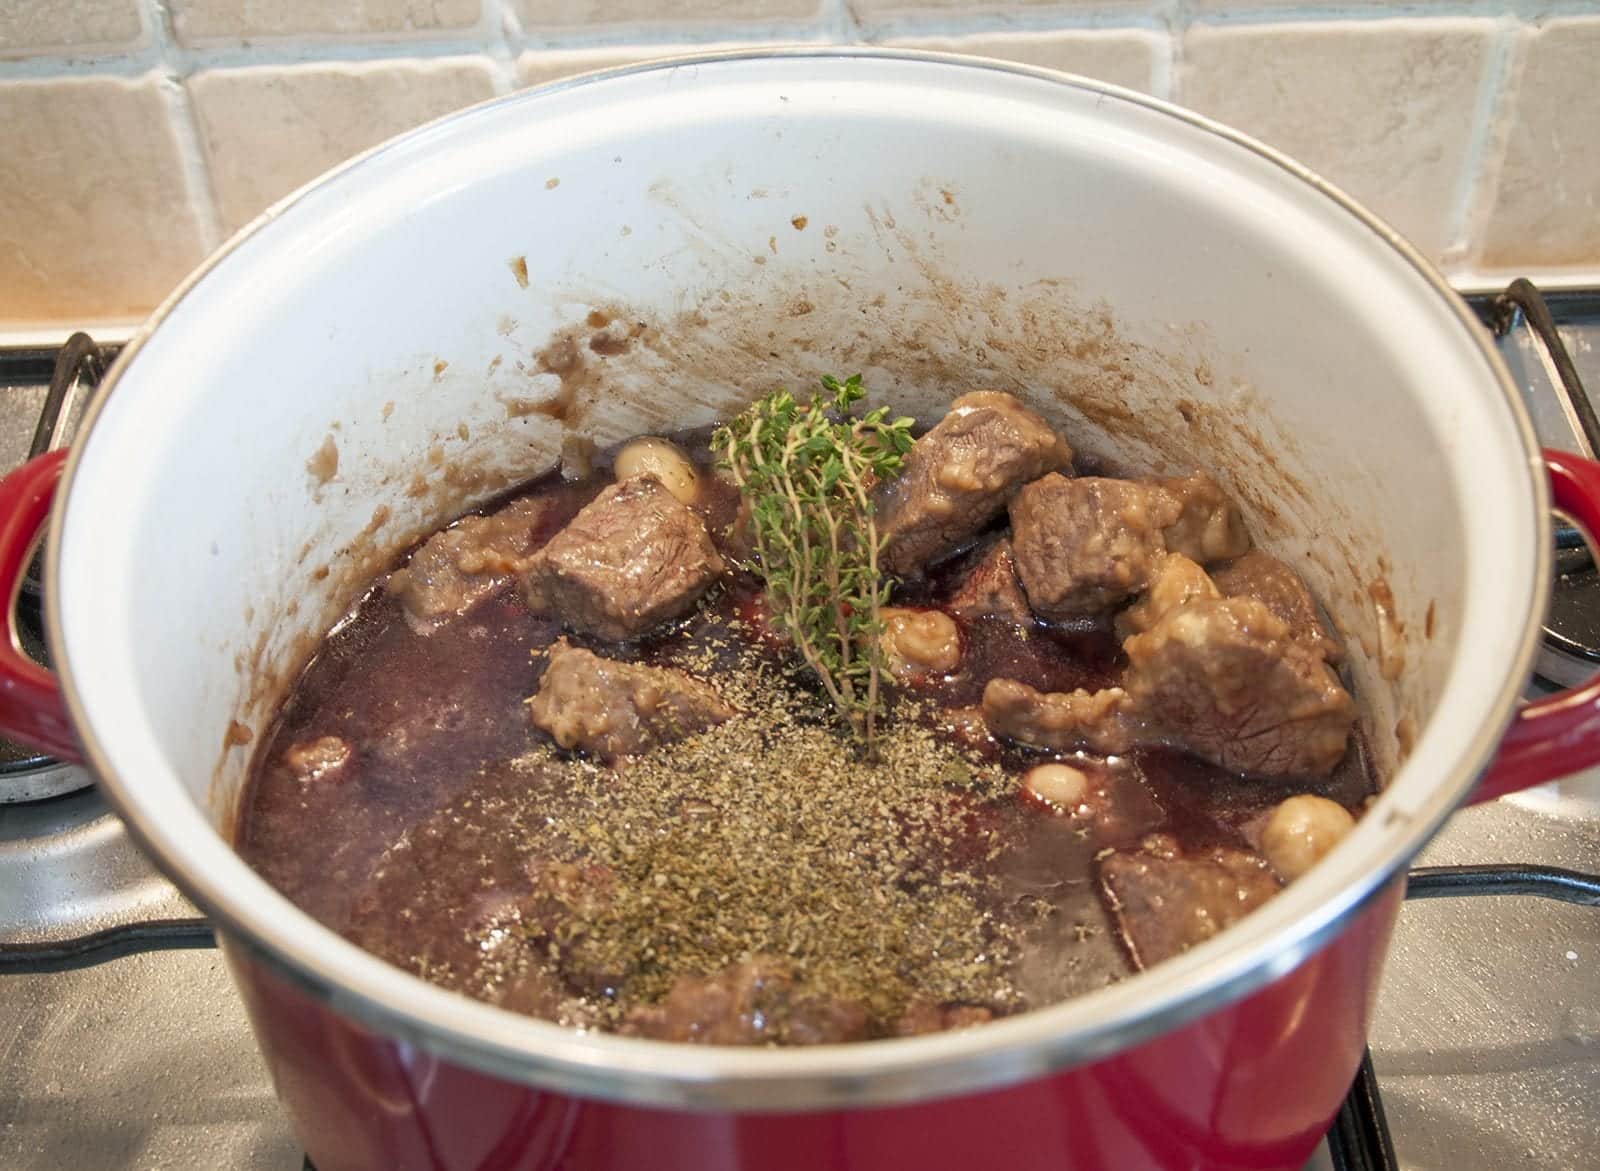 Braised beef rump in red wine. Add the thyme and mixed herbs | https://theyumyumclub.com/2019/05/08/braised-beef-rump-red-wine/